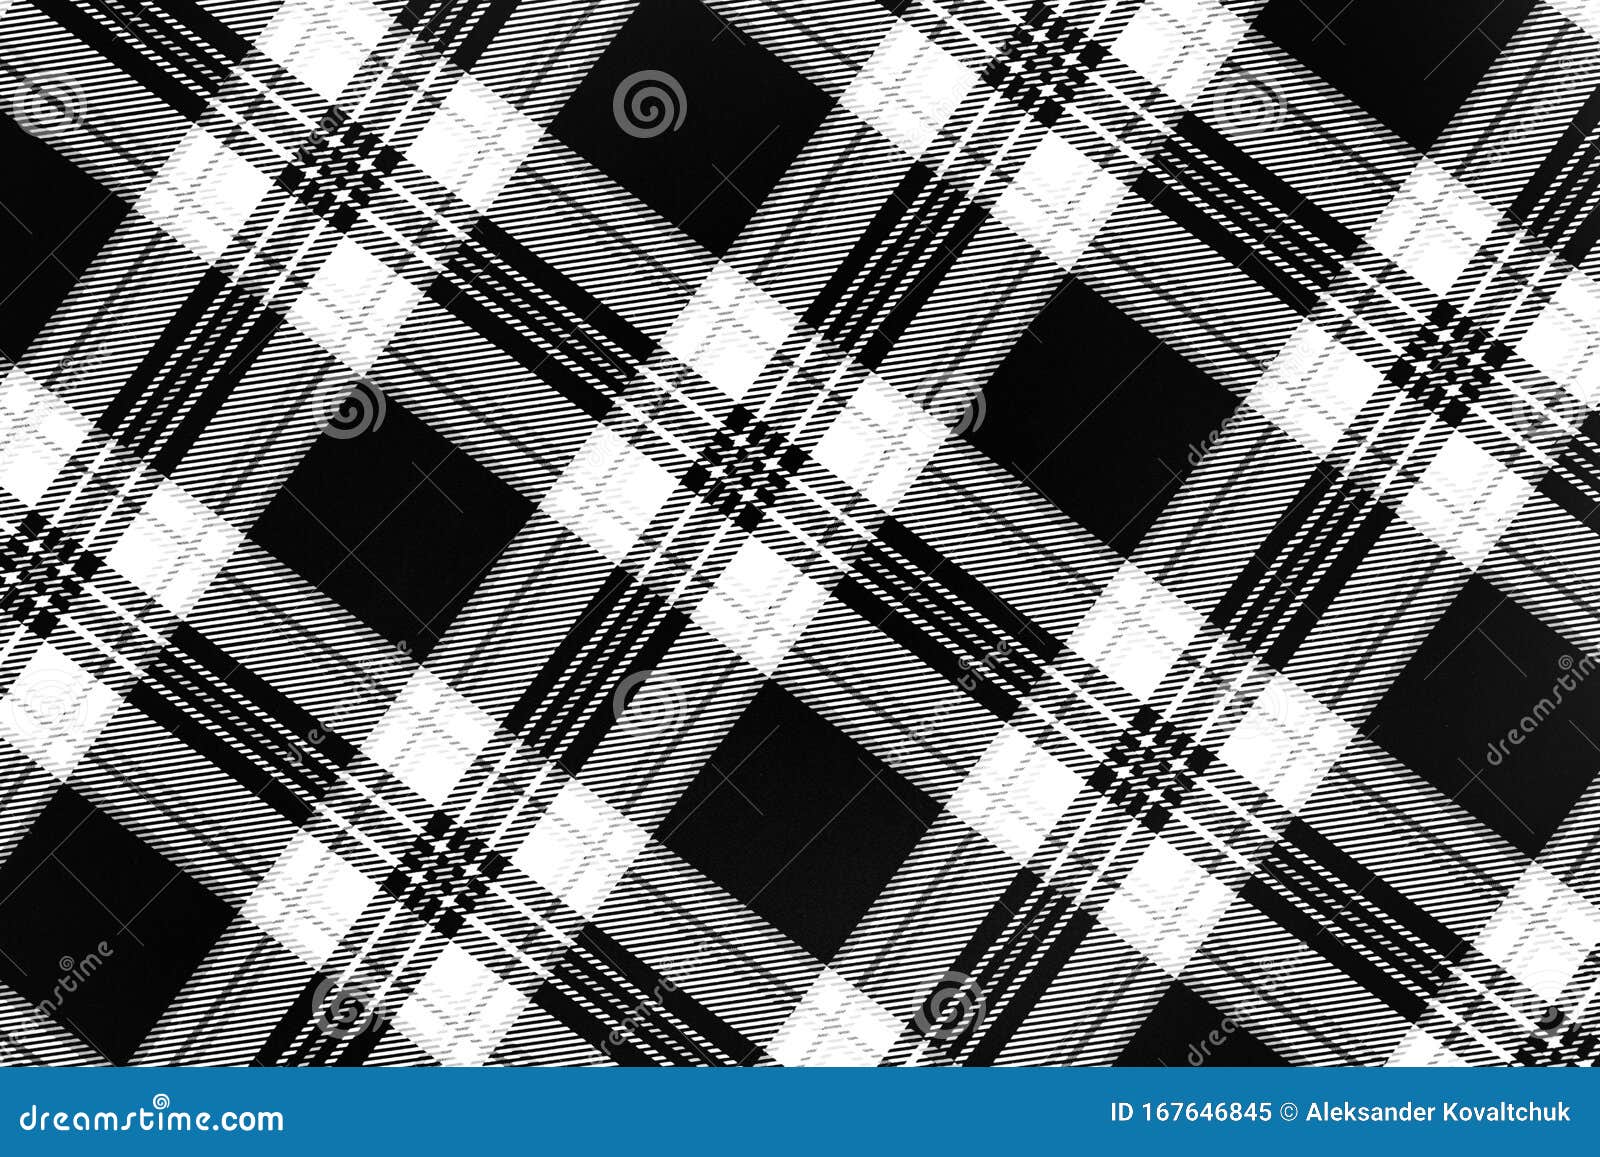 Spotted Black And White Grunge Abstract Halftone Background Images, Photos, Reviews